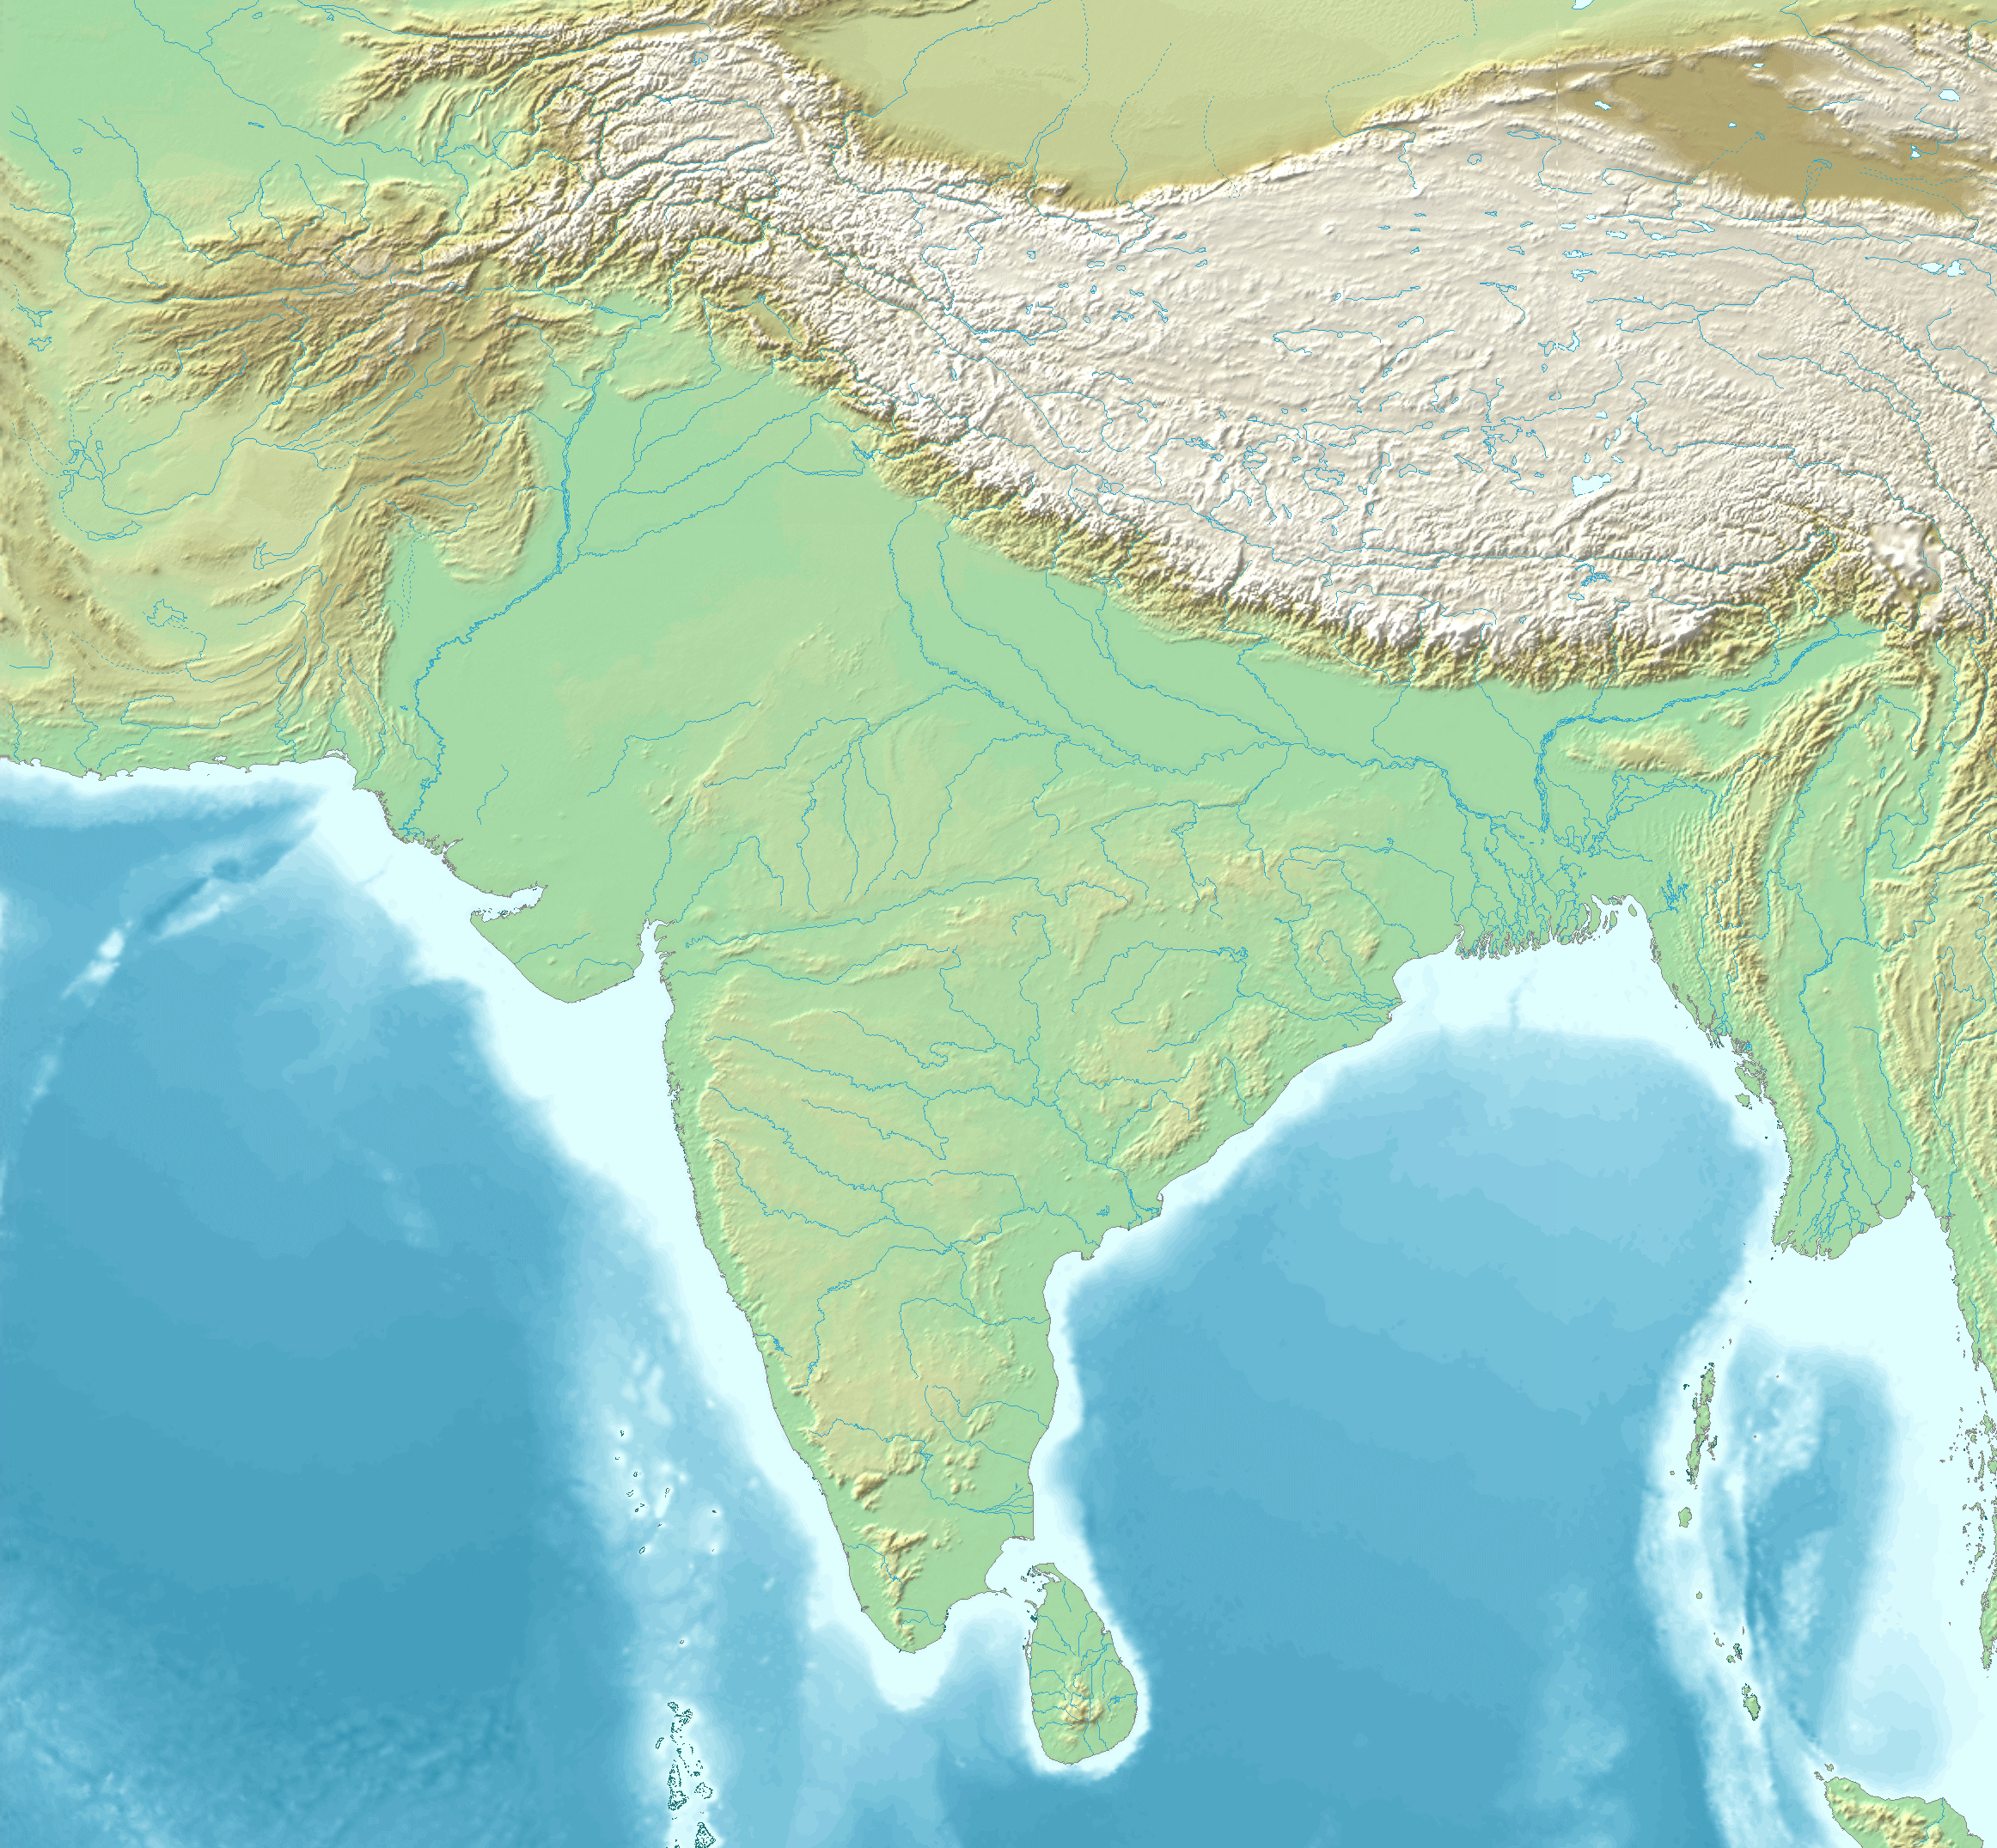 Indian subcontinent - Wikipedia